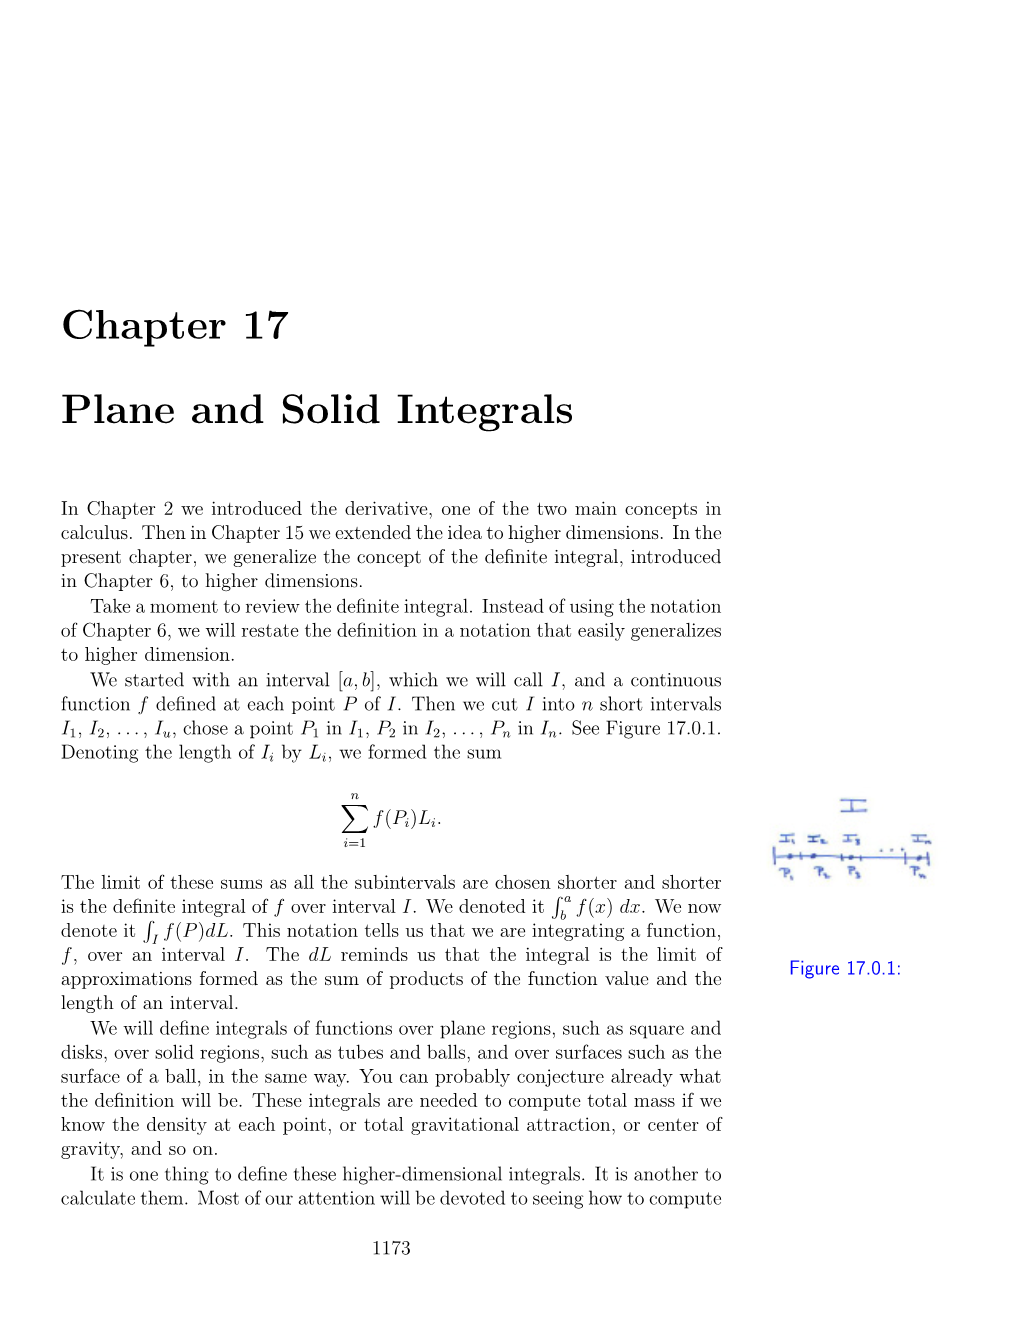 Chapter 17 Plane and Solid Integrals